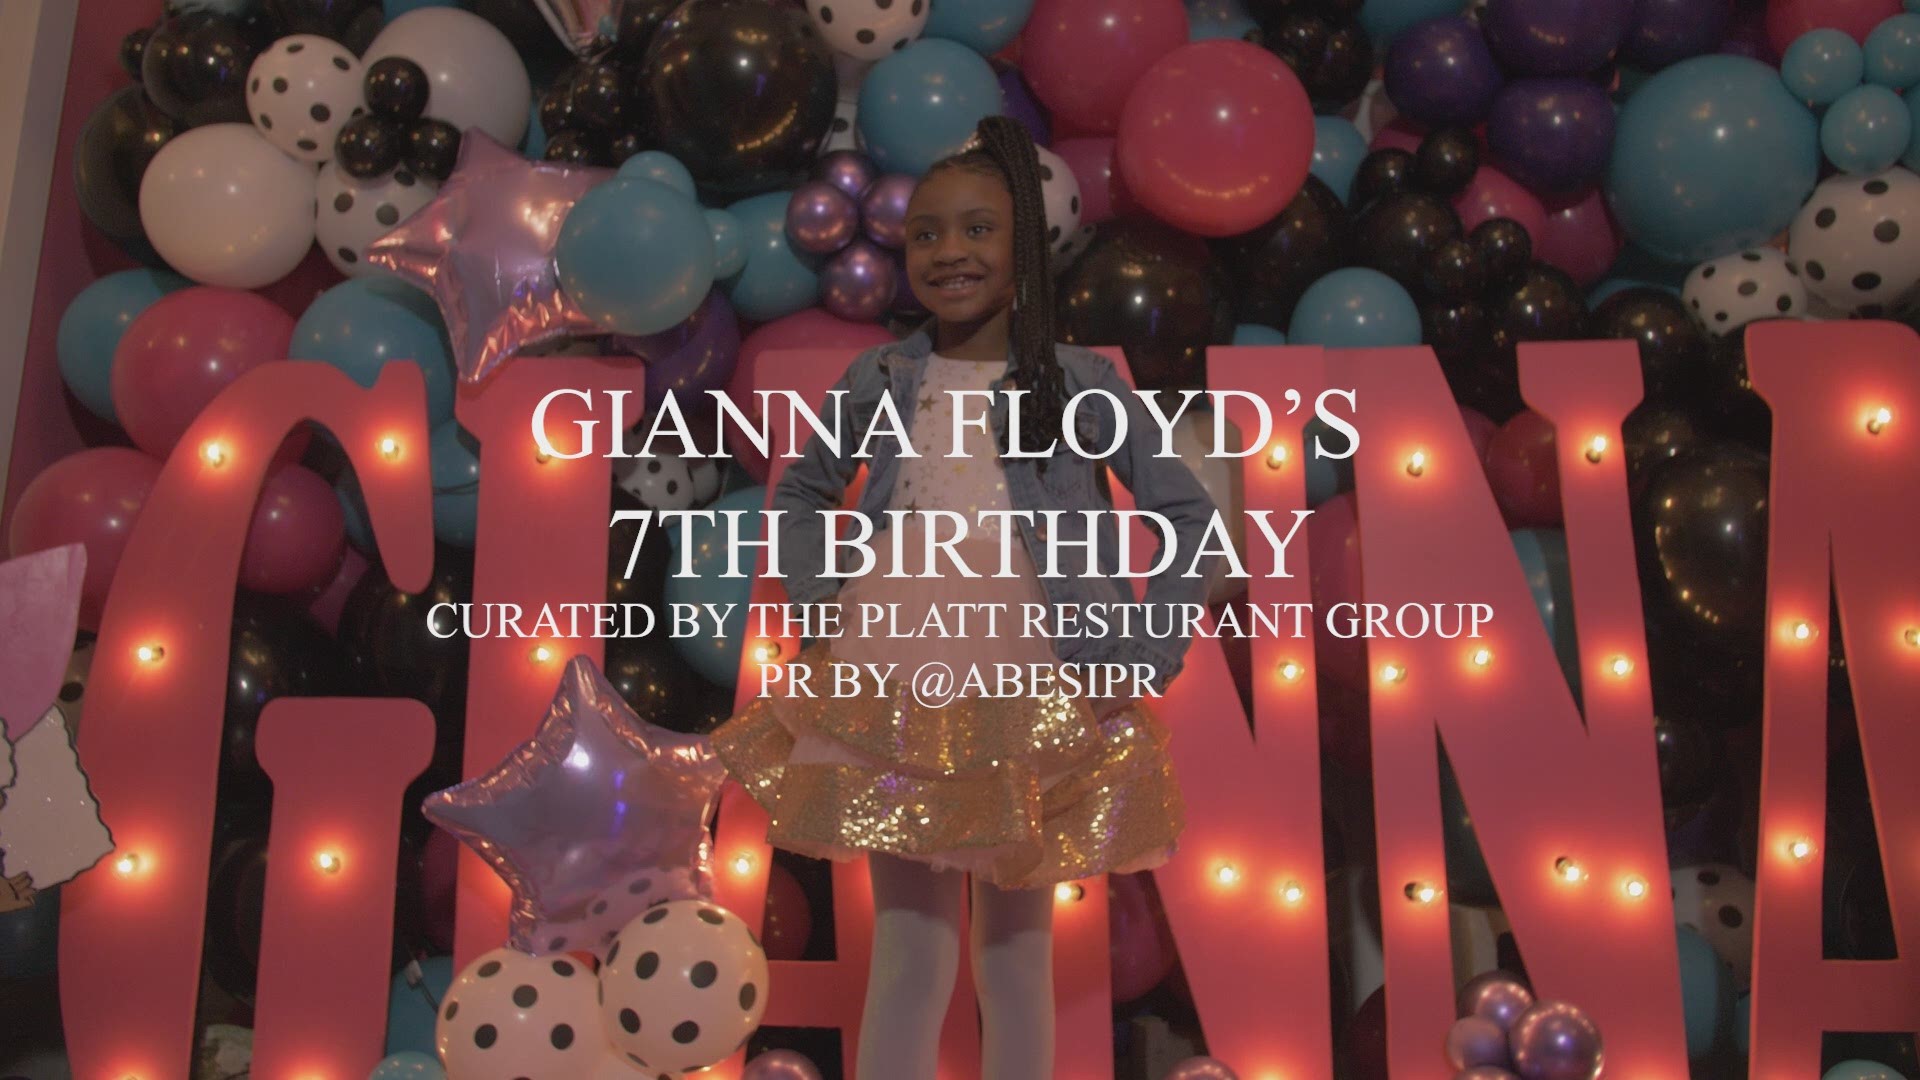 With the support of Atlanta restaurateurs, Ericka and William Platt, Lil Baby makes Gianna Floyd’s birthday unforgettable.